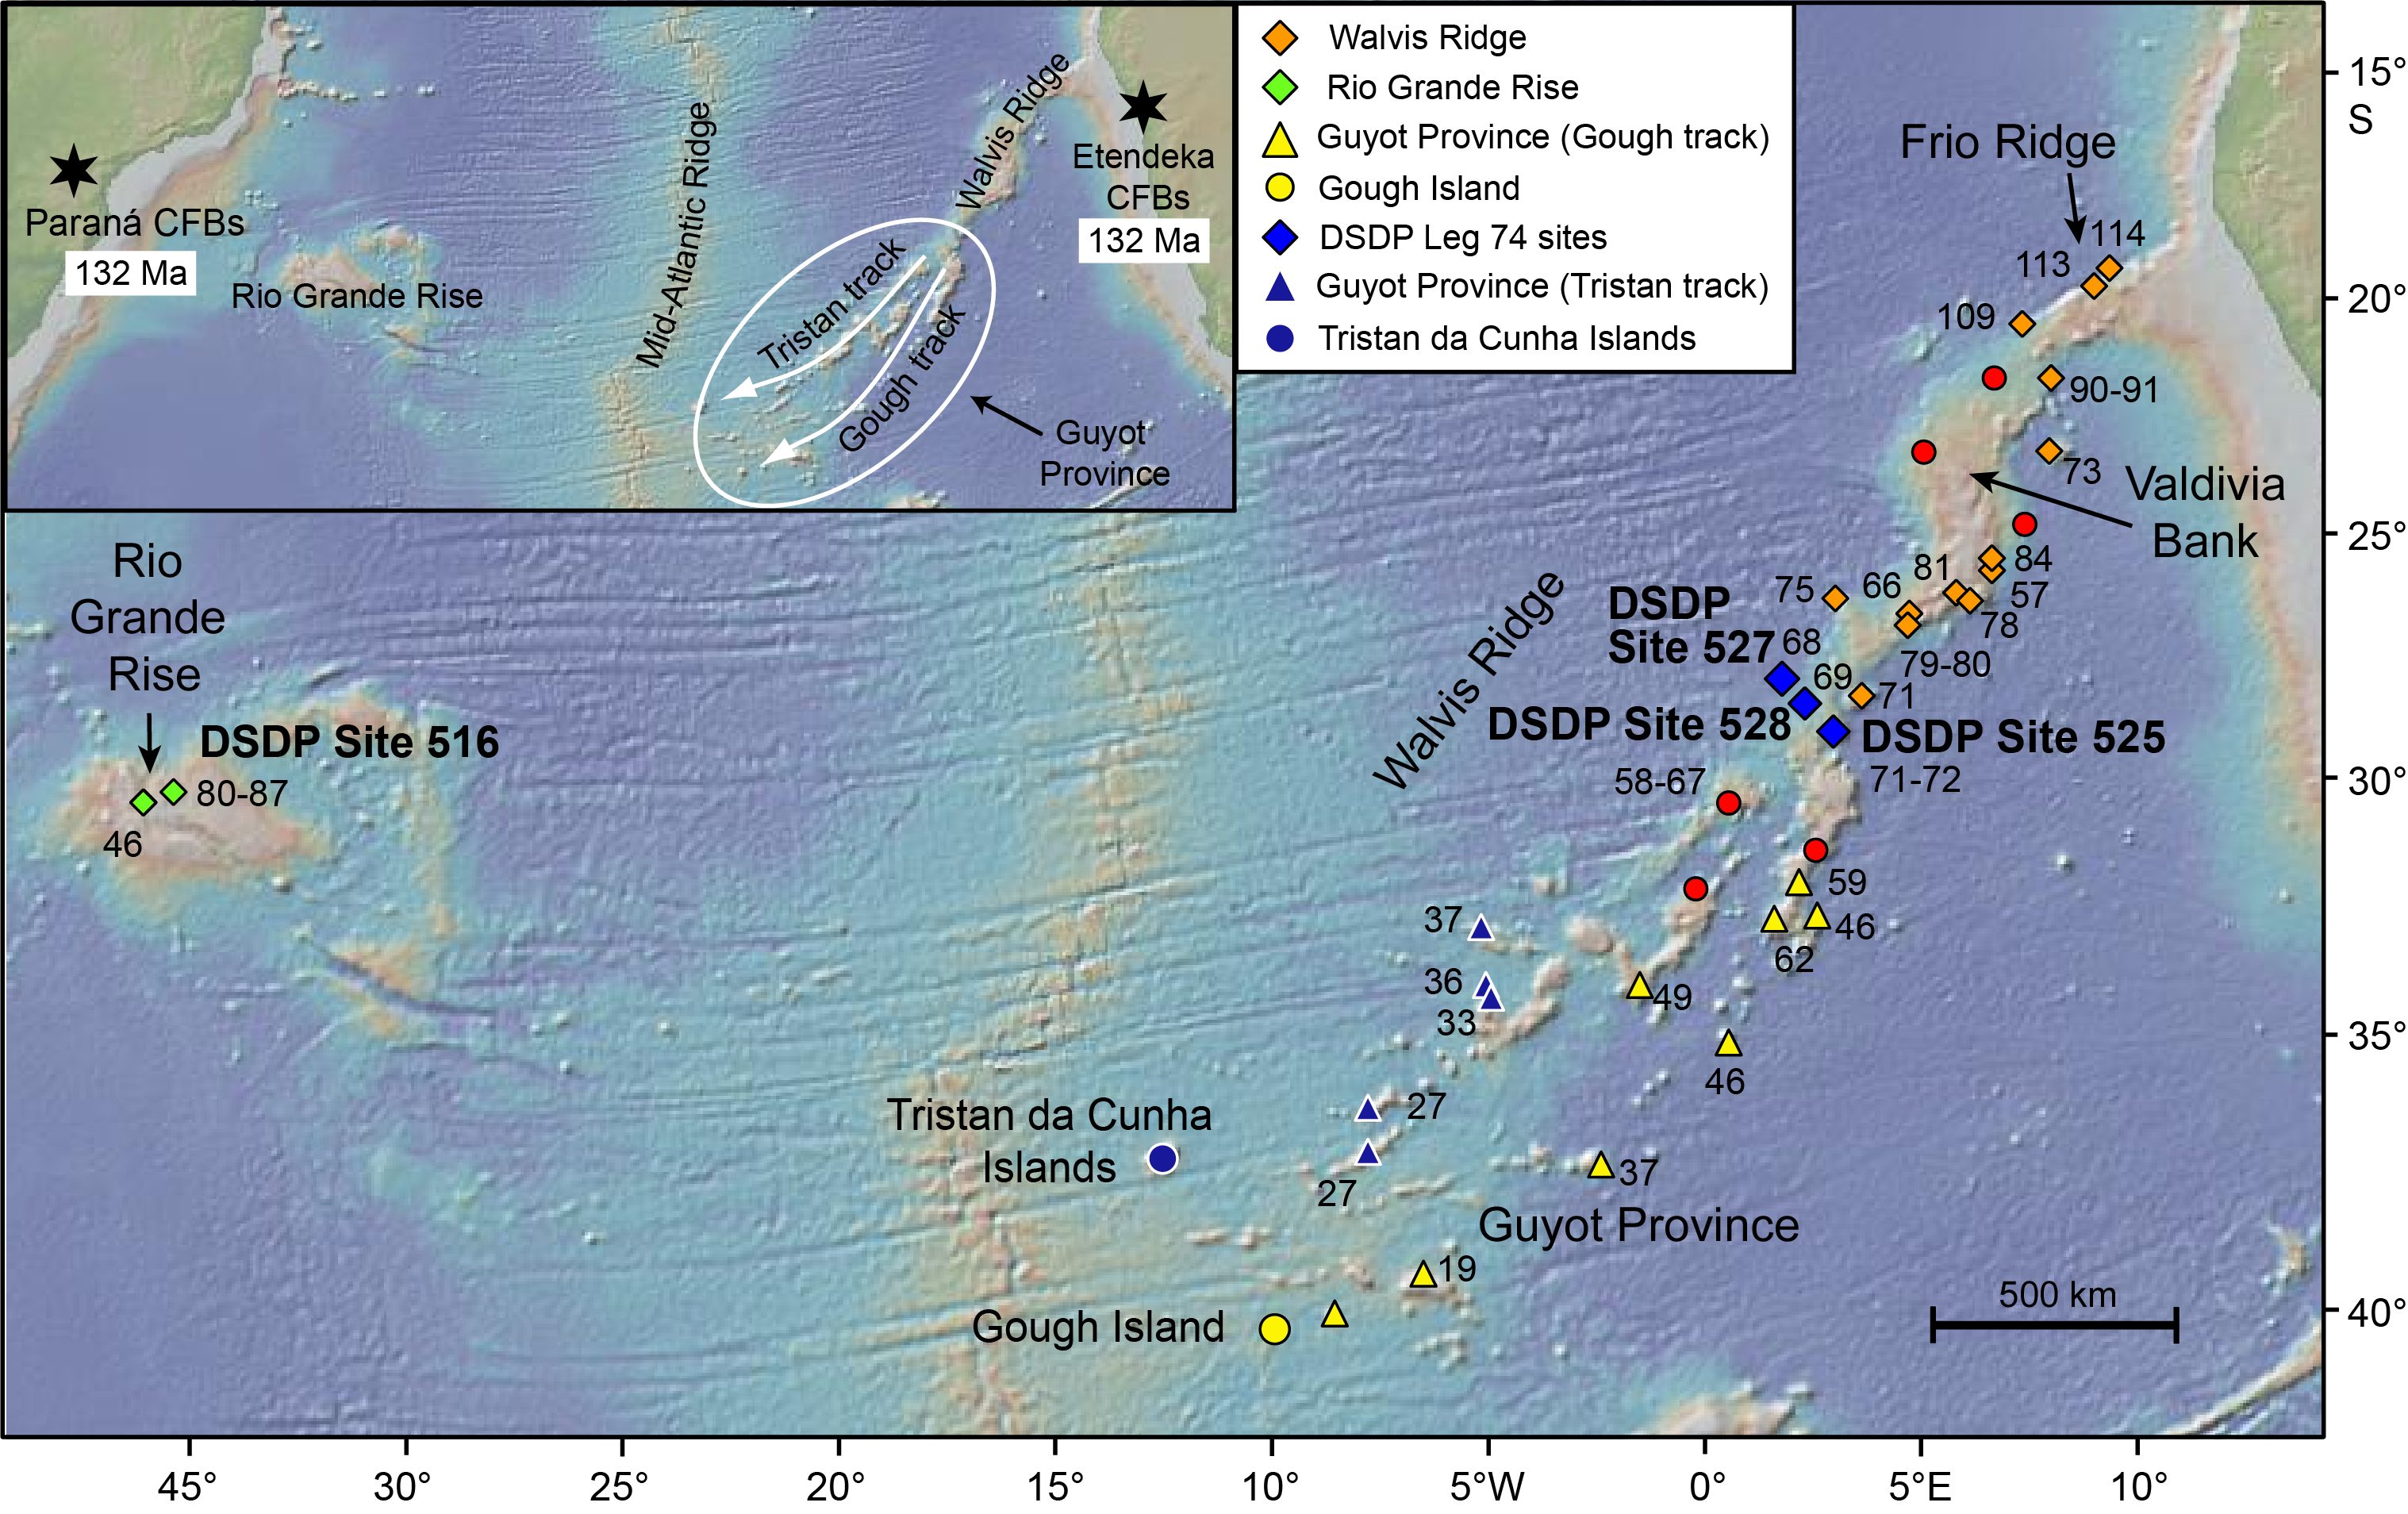 The general survey area on the Louisville Seamount Chain, showing